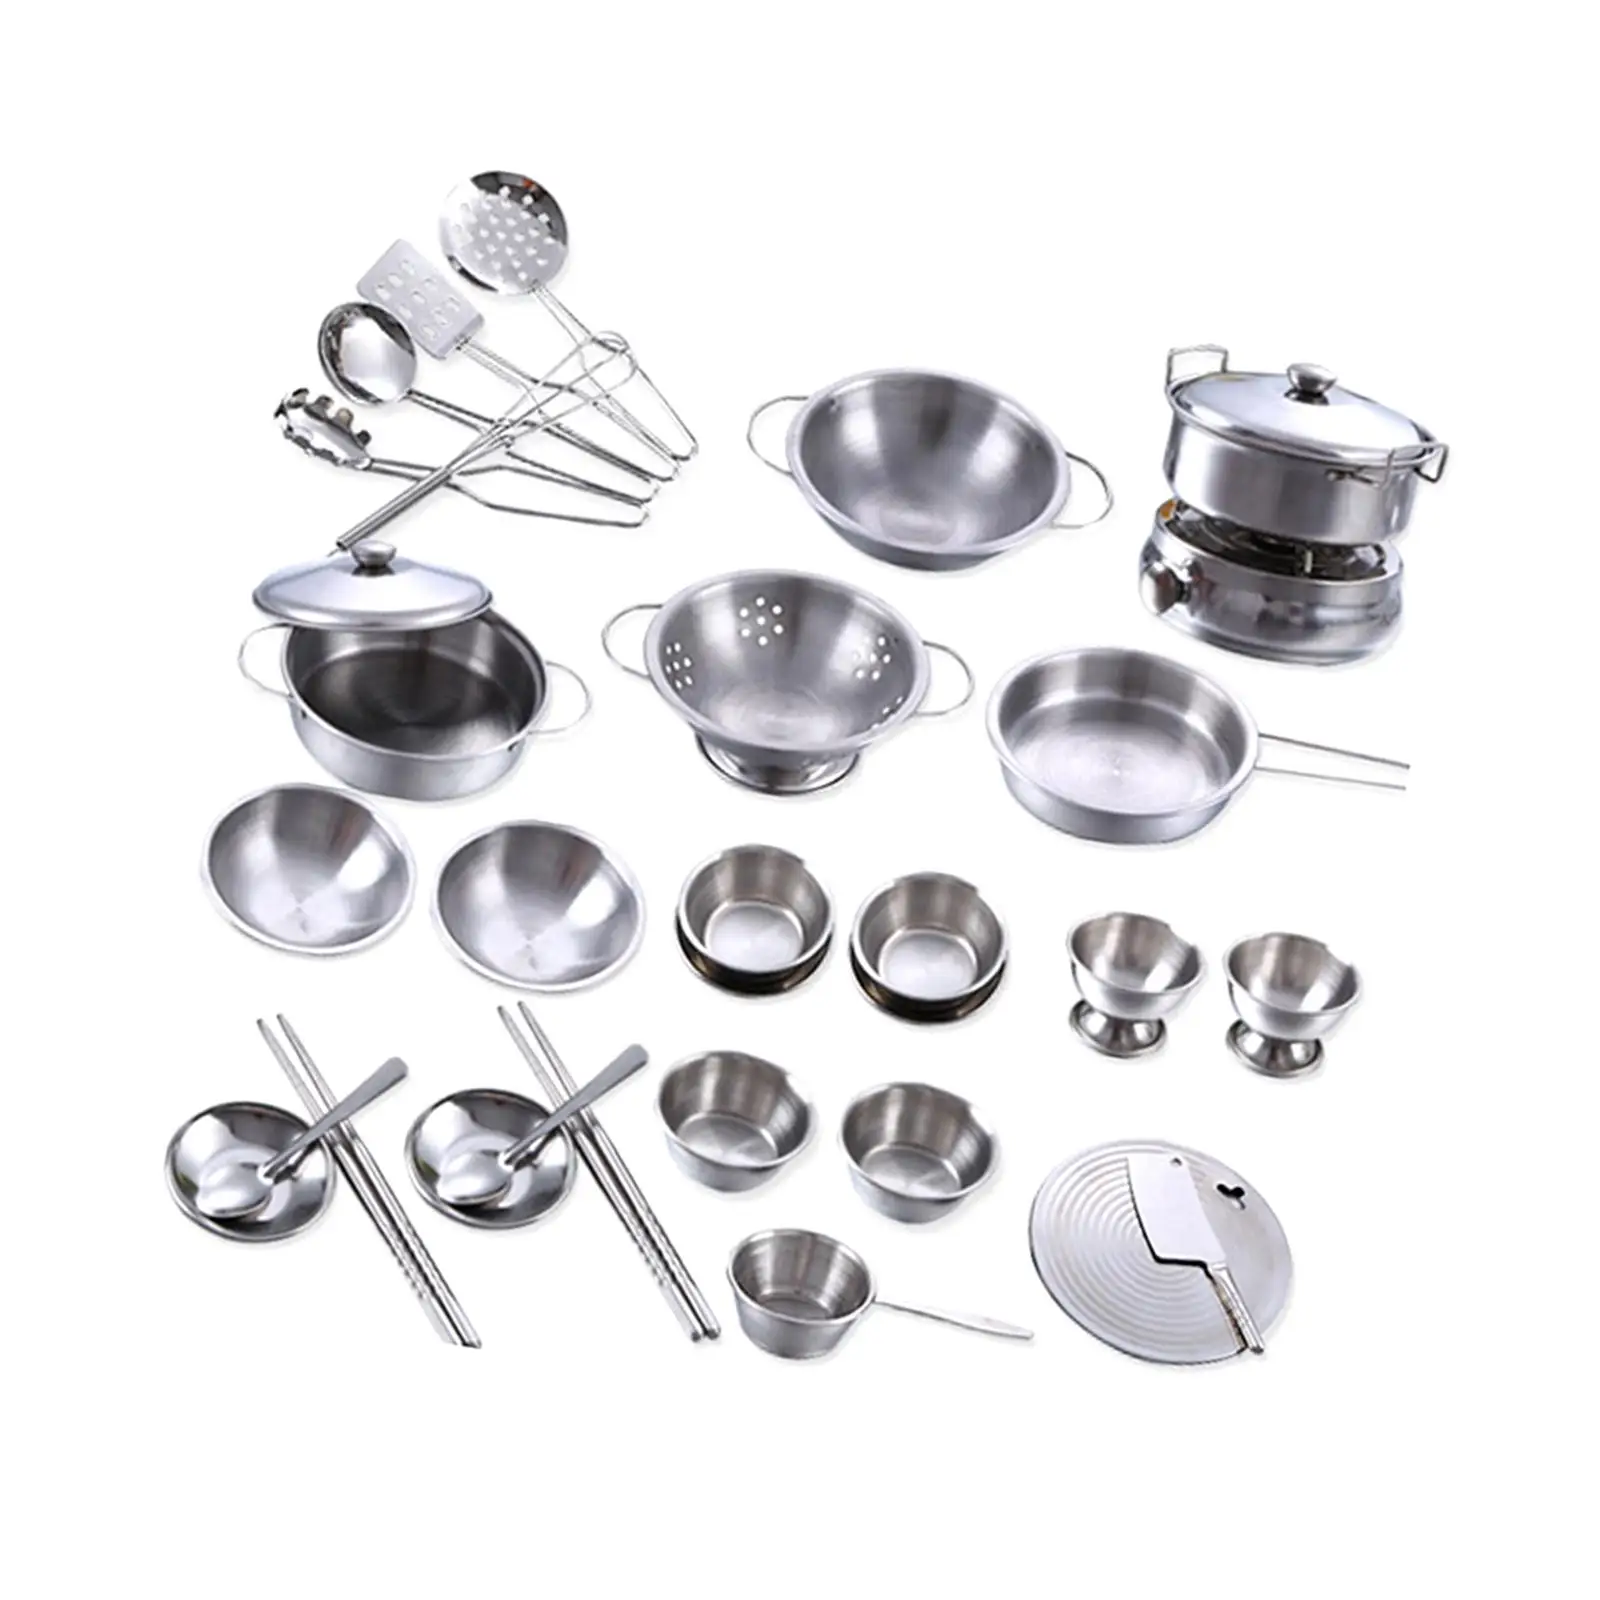 25 Pieces Kids Pretend Play Cookware Set Kitchen Toys Polished Stainless Steel